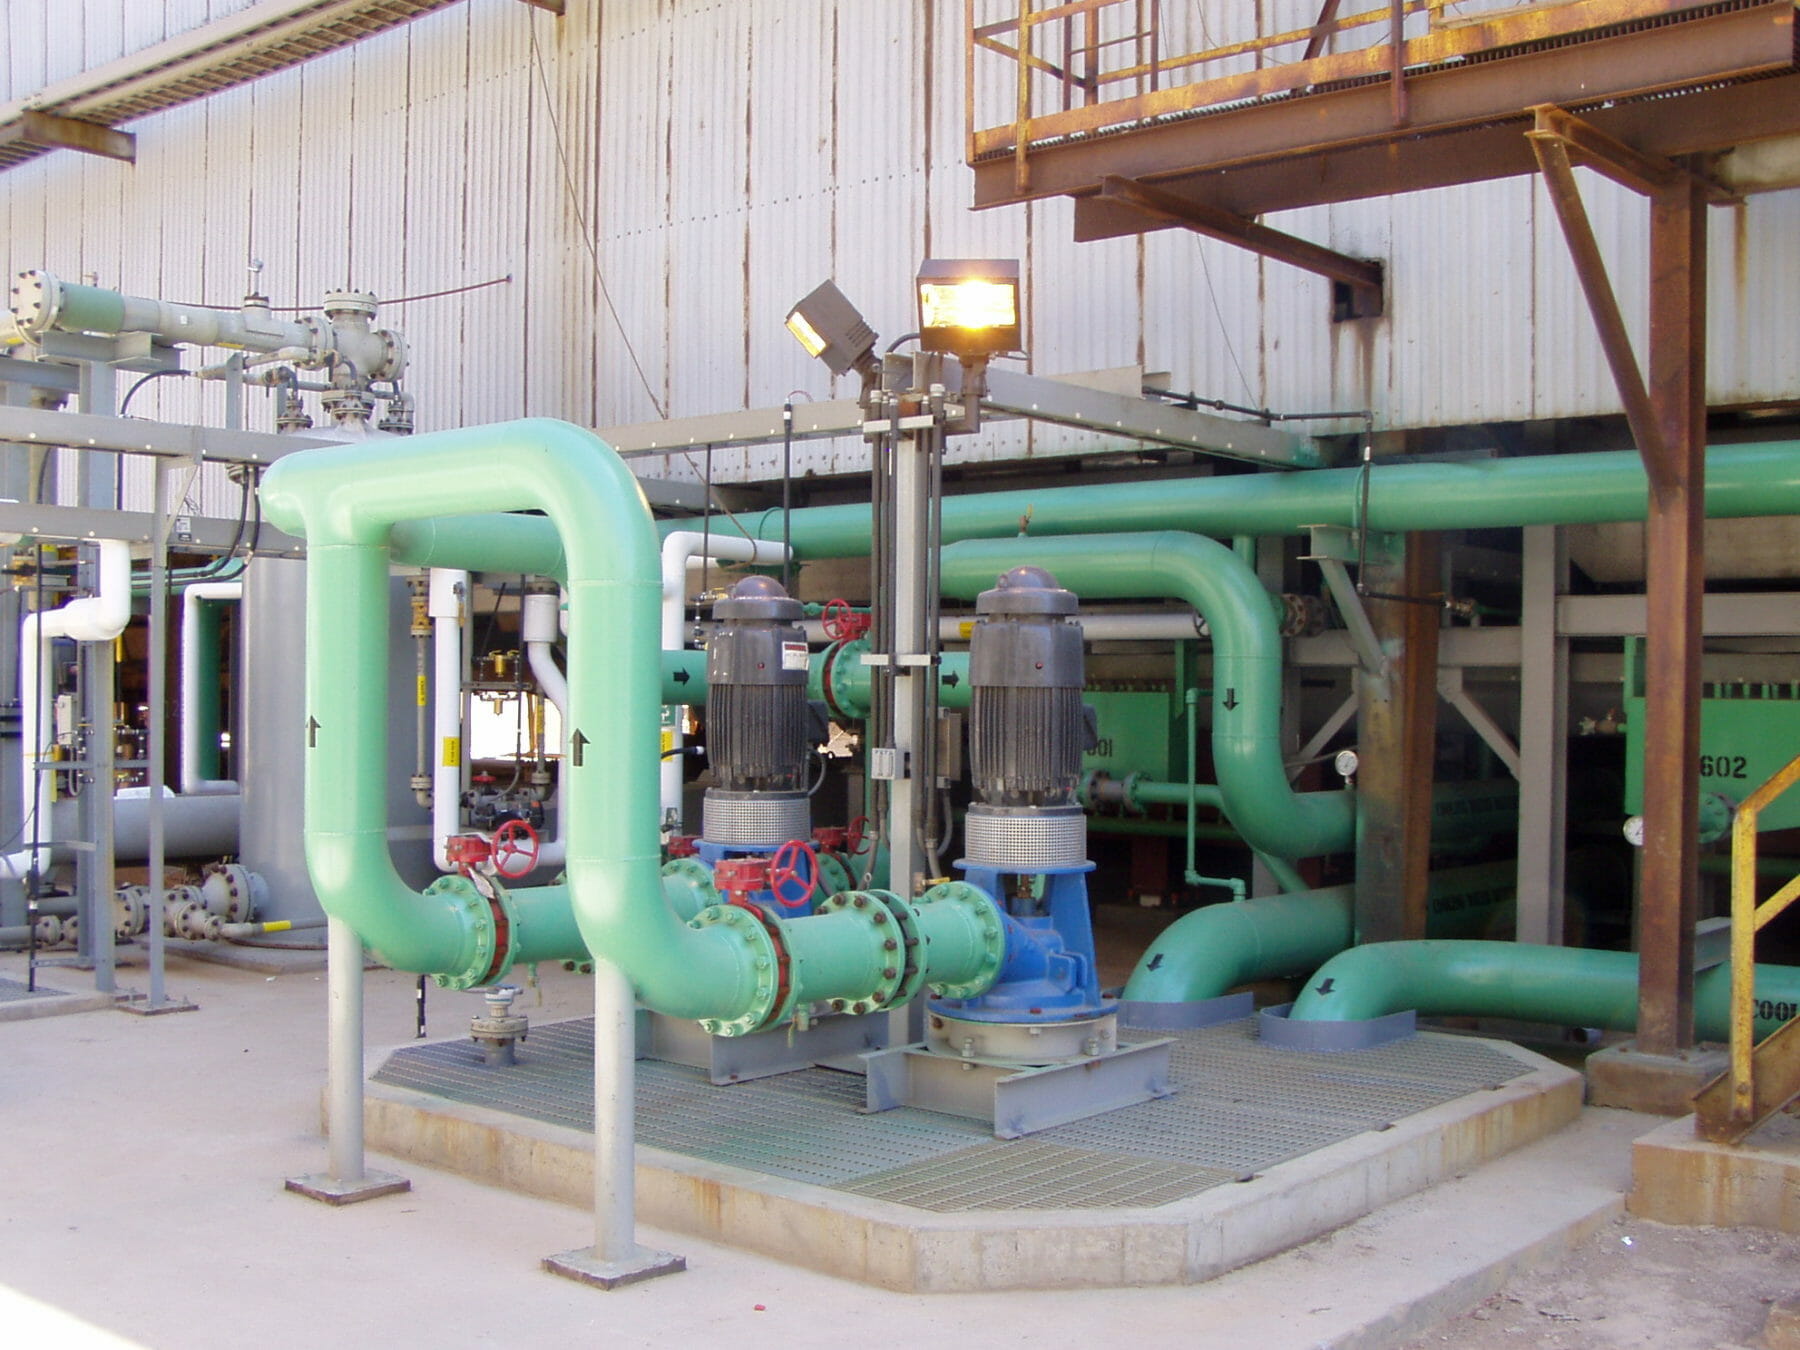 Industrial Outdoor Piping | Industrial Plant Construction Contractors | Wollam Construction